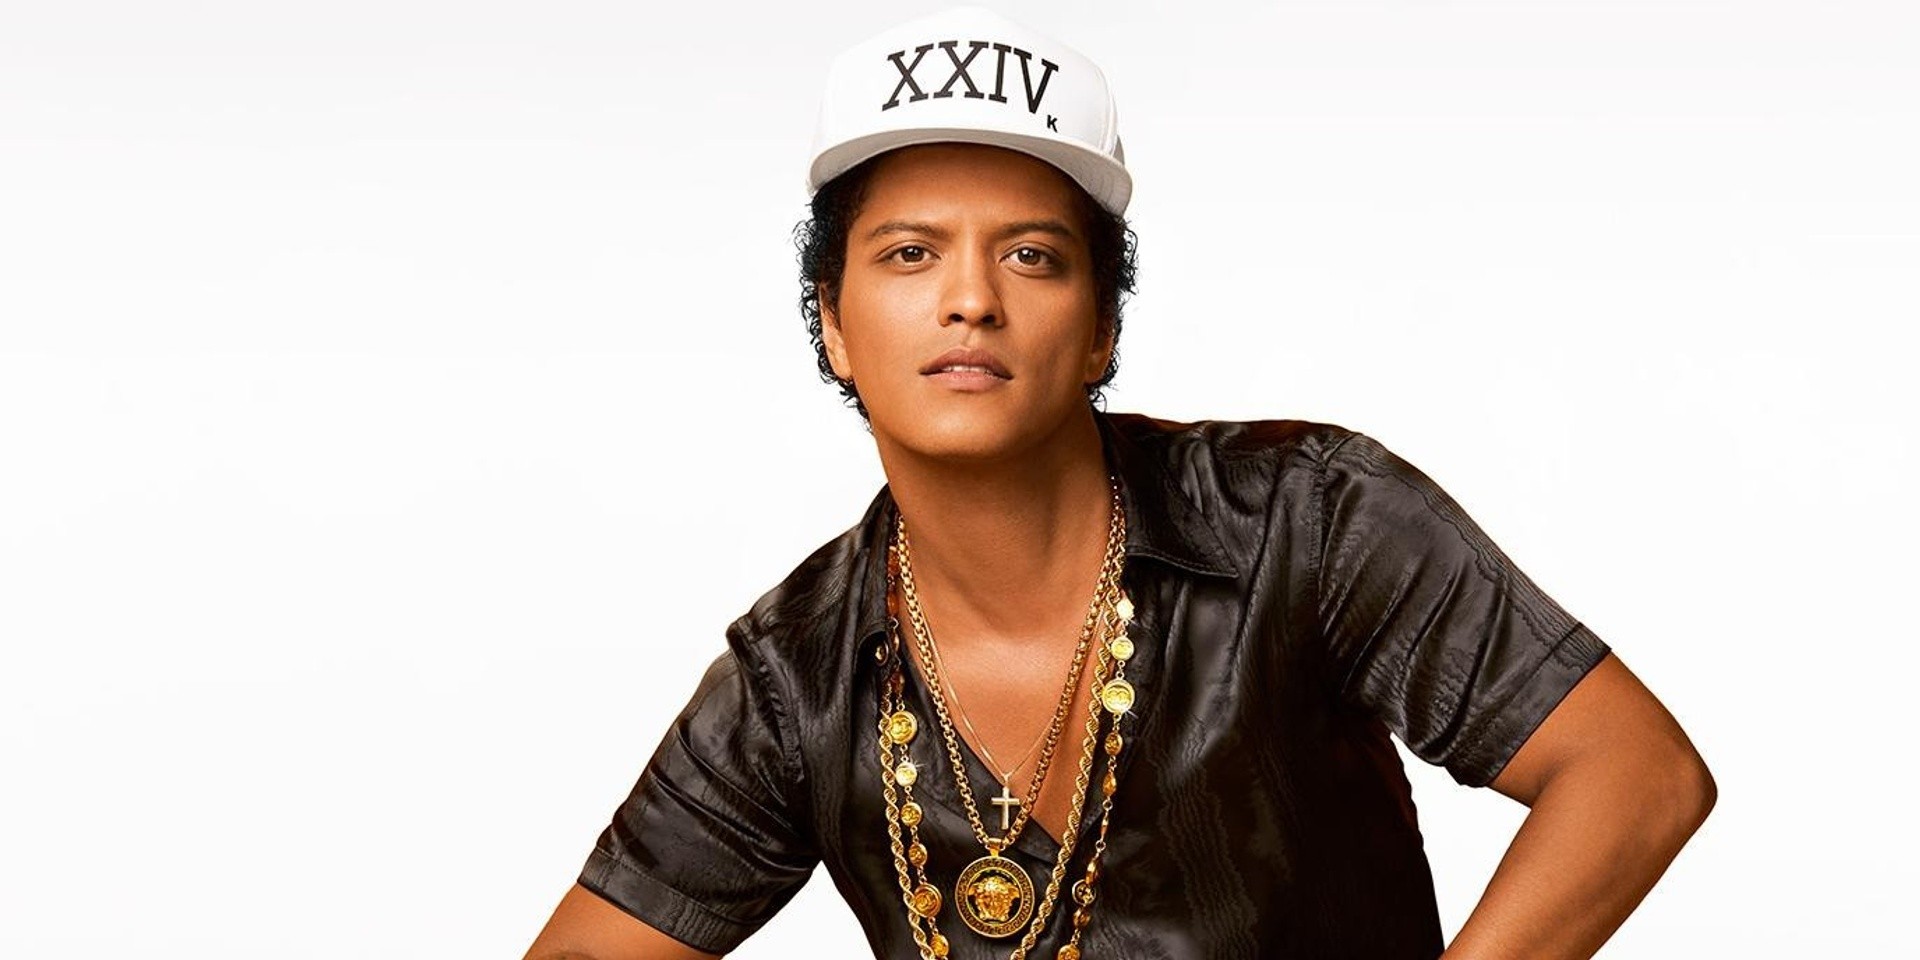 Bruno Mars official 24K Magic World Tour merch and prices have been revealed